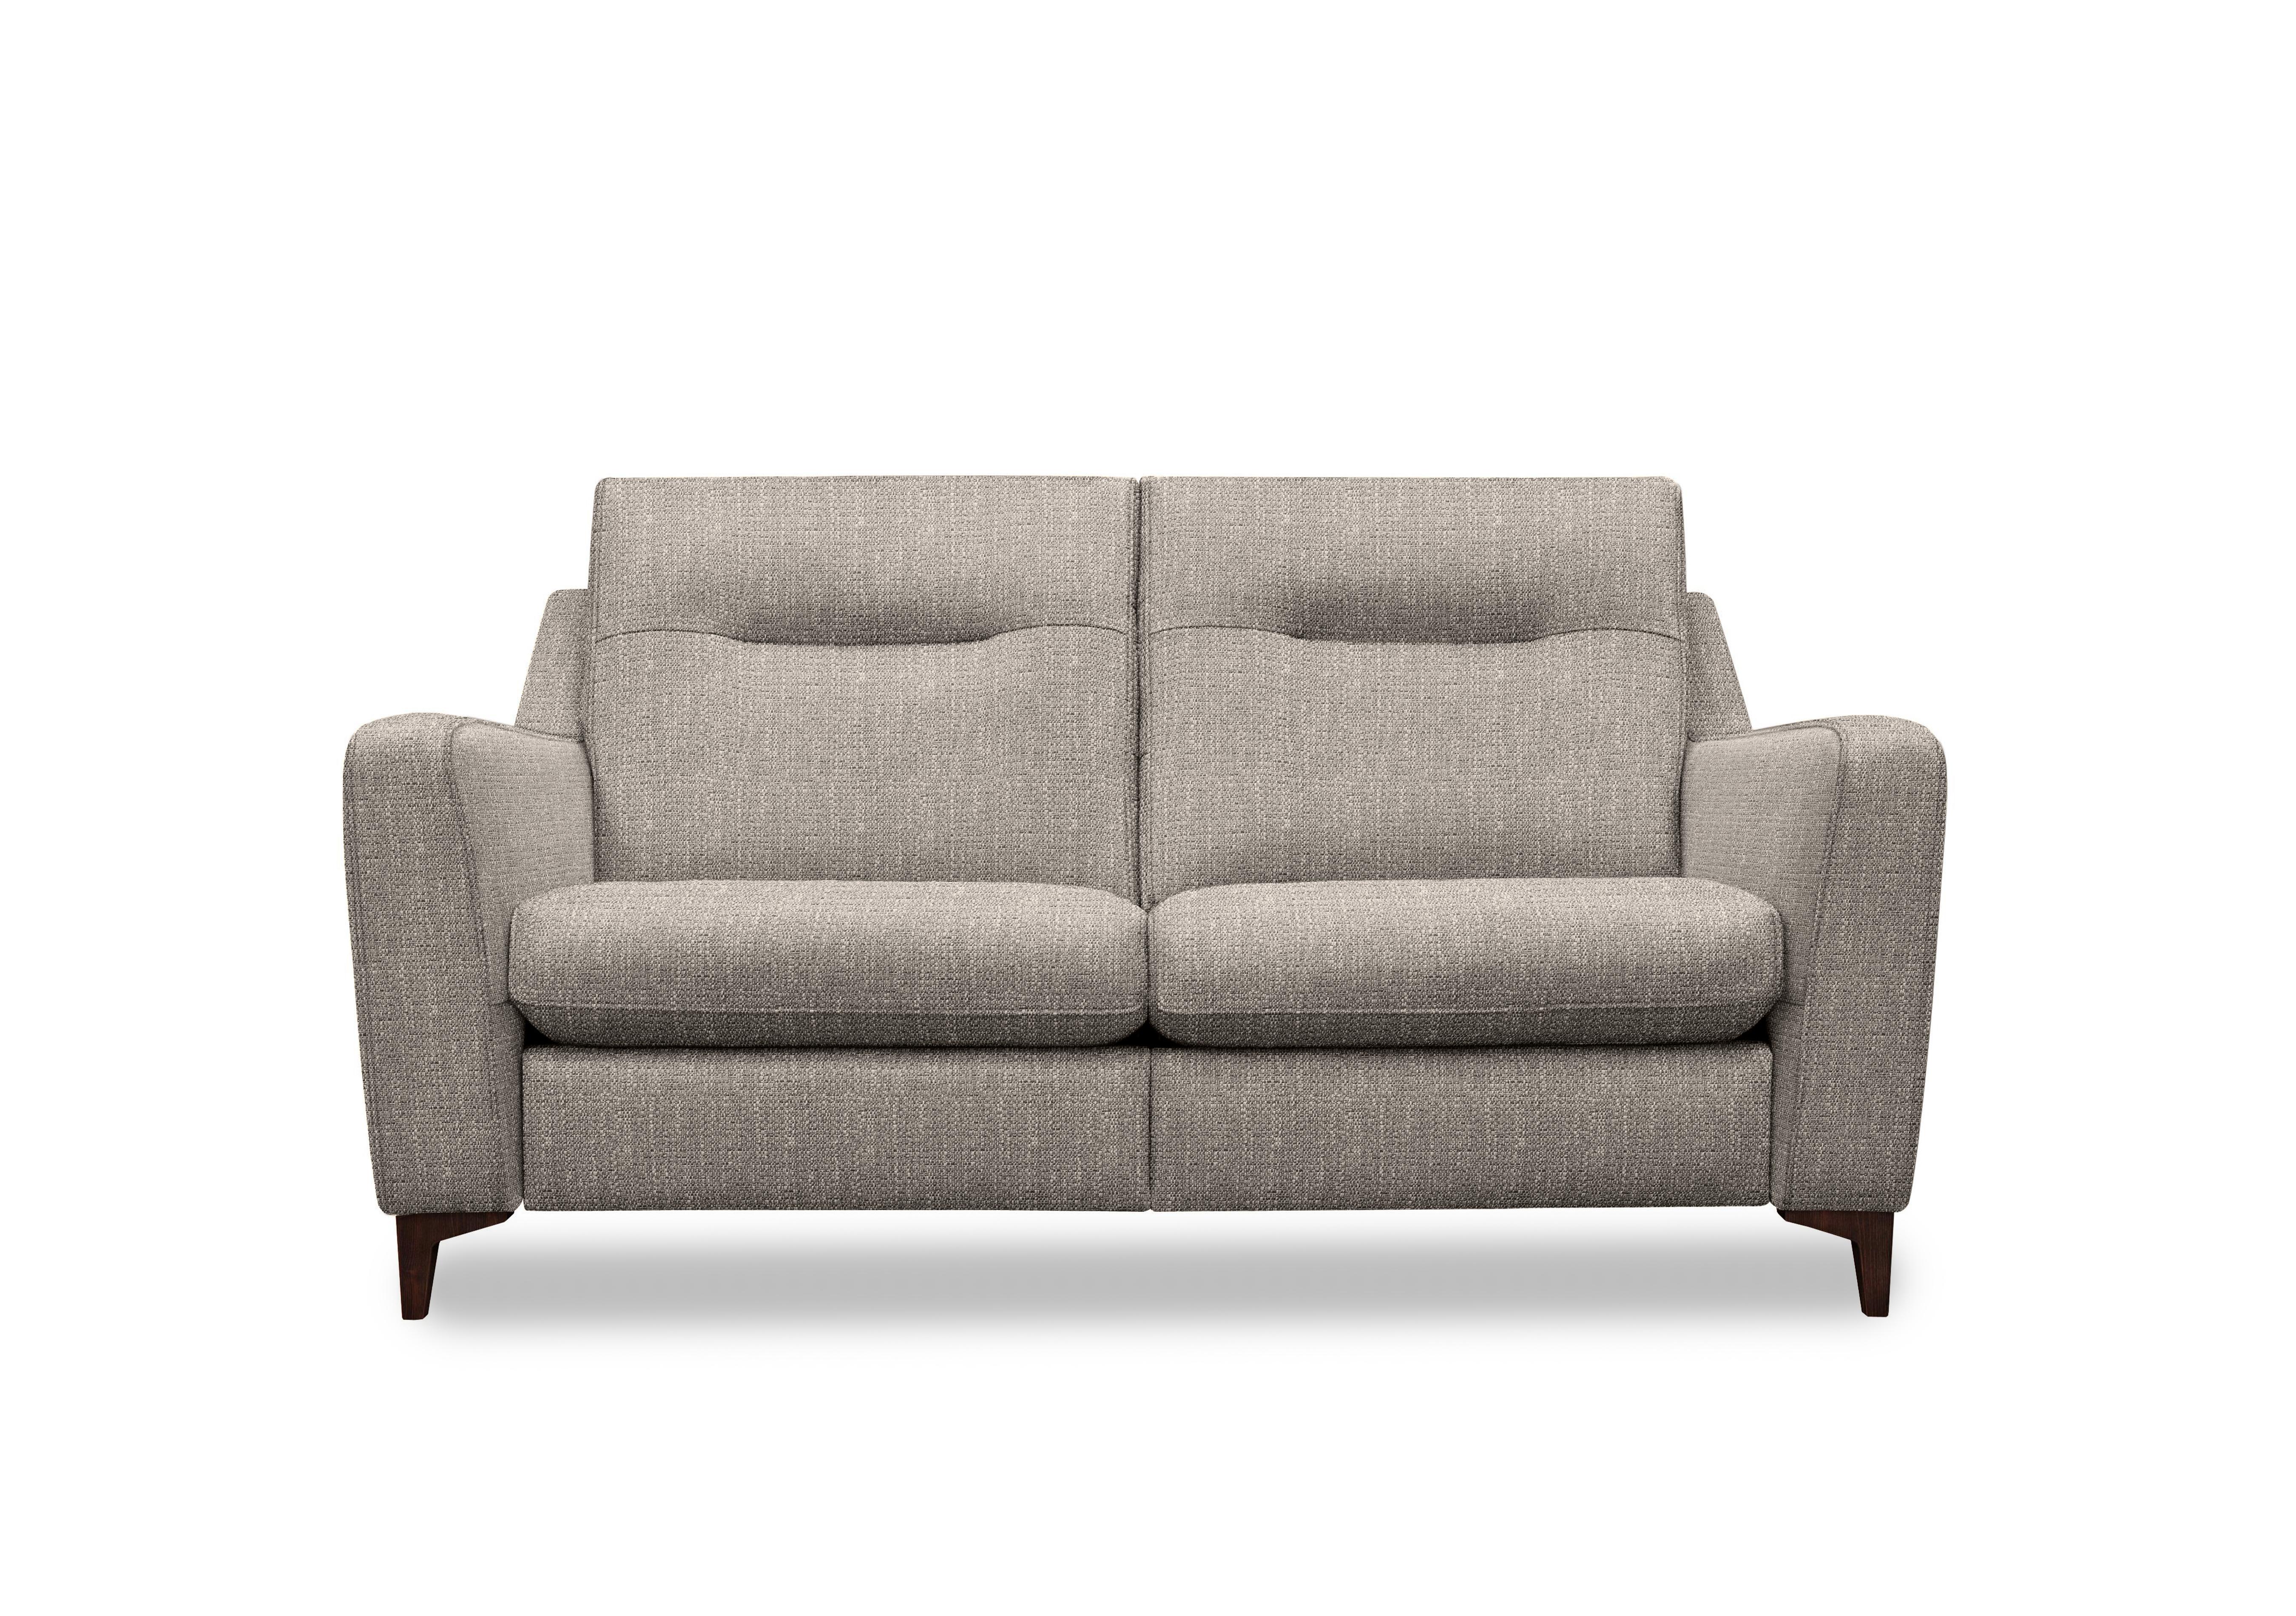 Arlo 2 Seater Fabric Sofa in B135 Libby Sand Wal Ft on Furniture Village